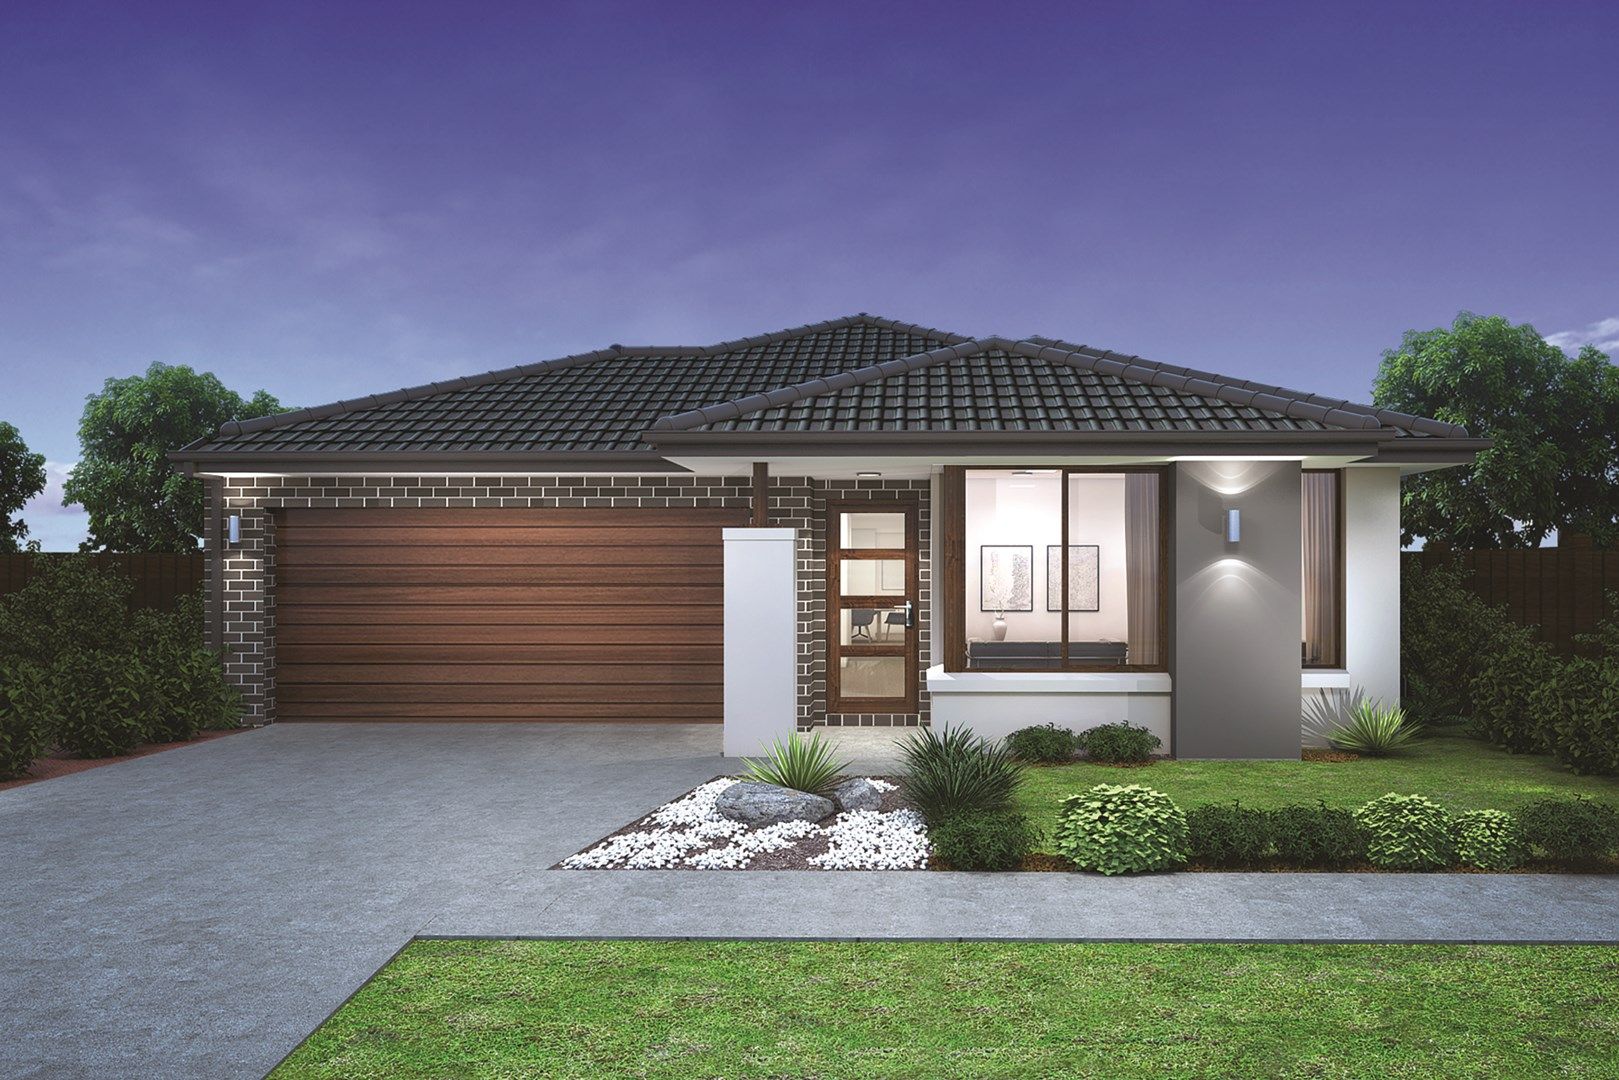 3 bedrooms New House & Land in Lot 616 Taylor's Run FRASER RISE VIC, 3336